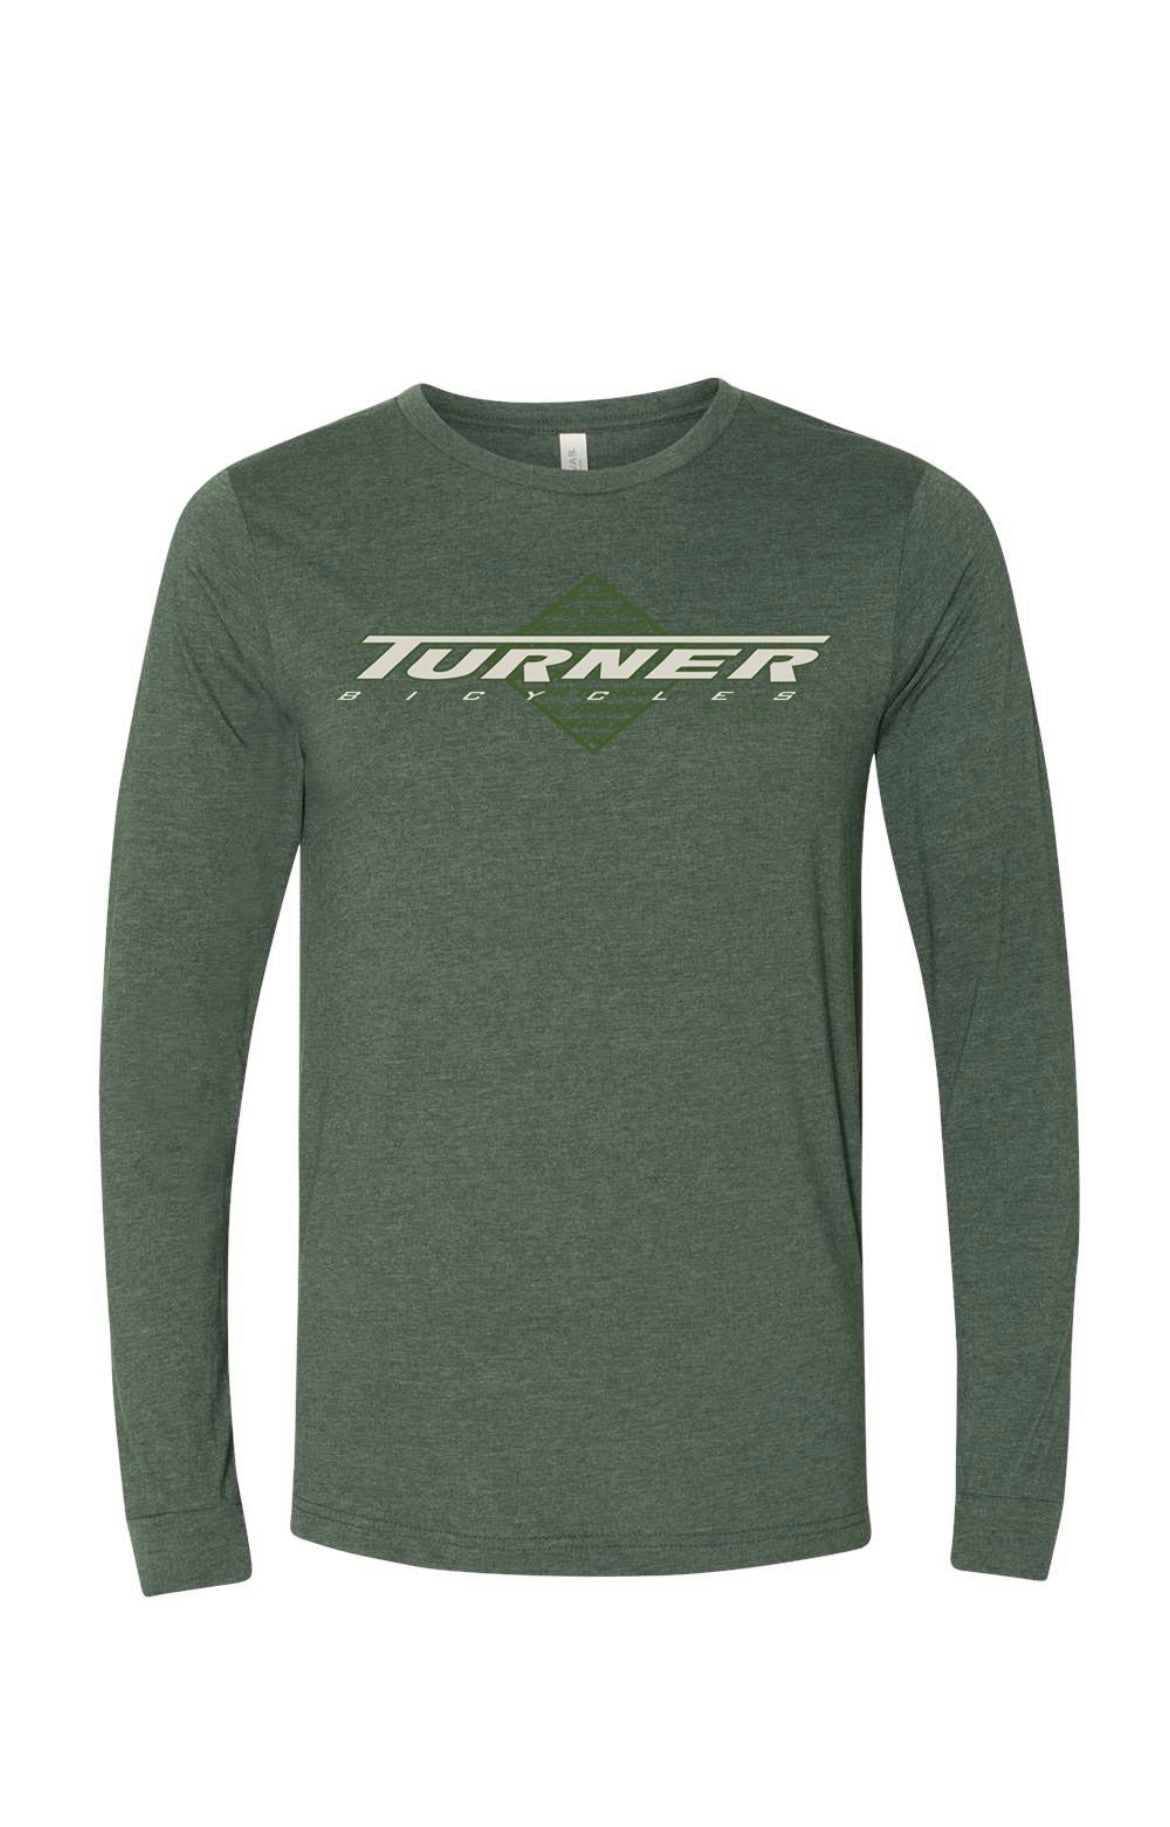 Forest Green heather, LONG sleeve Tshirt